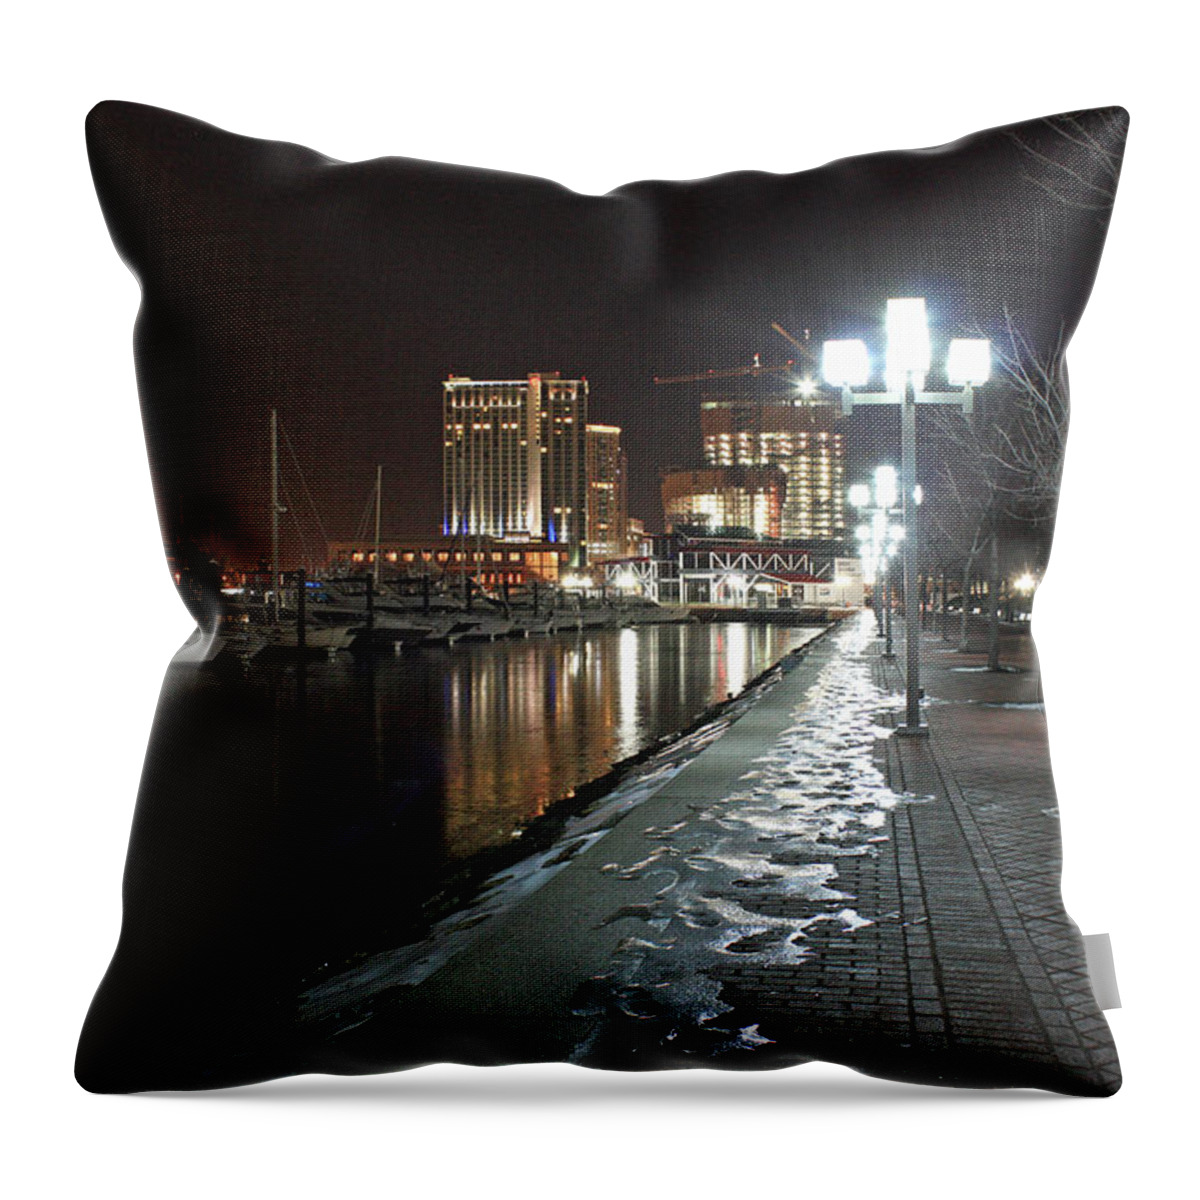 Baltimore Throw Pillow featuring the photograph Harbor Nights - East Promenade by Ronald Reid